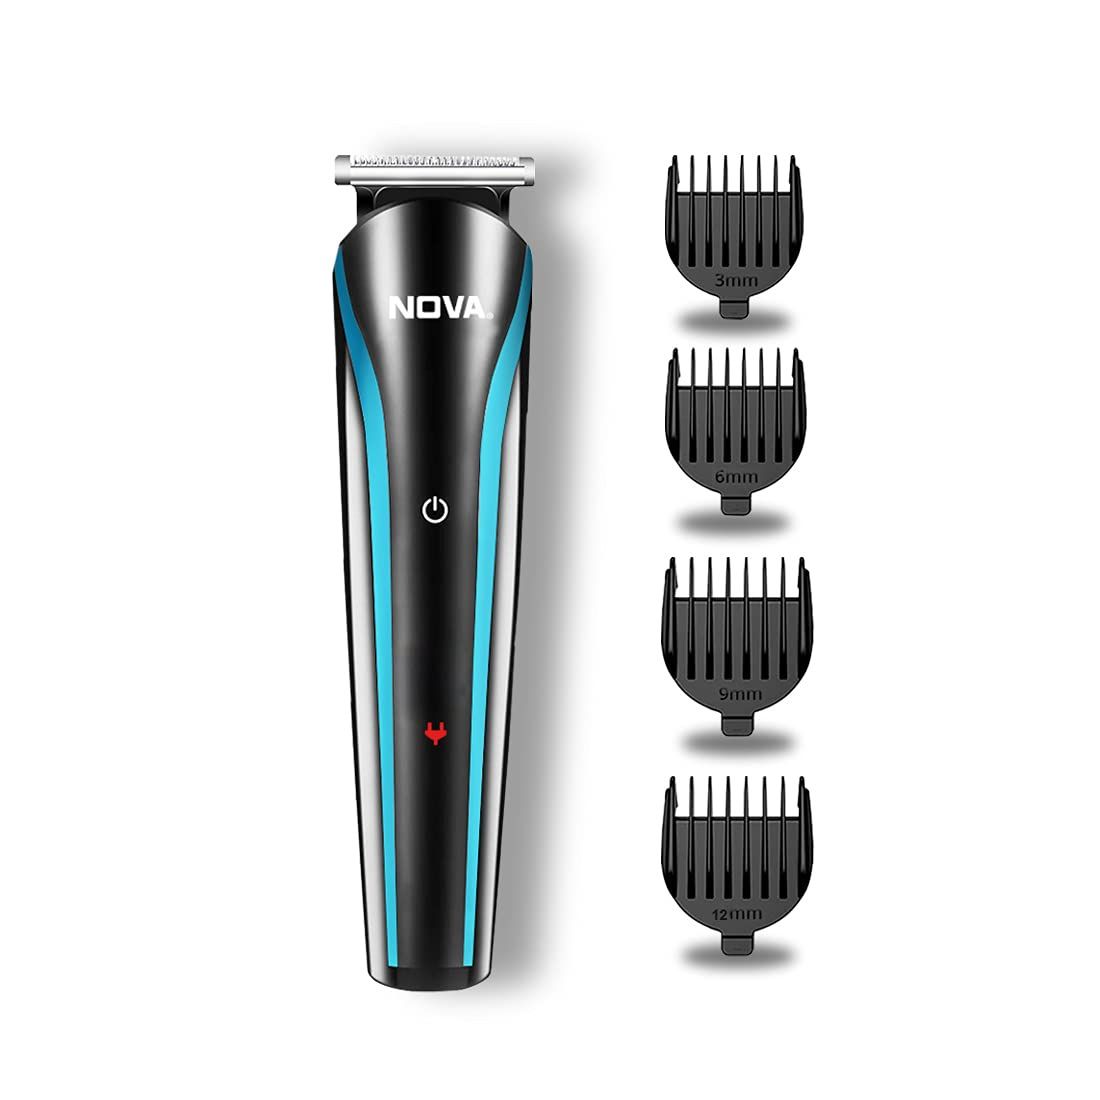 Nova NHT 1073 USB Rechargeable and Cordless beard trimmer